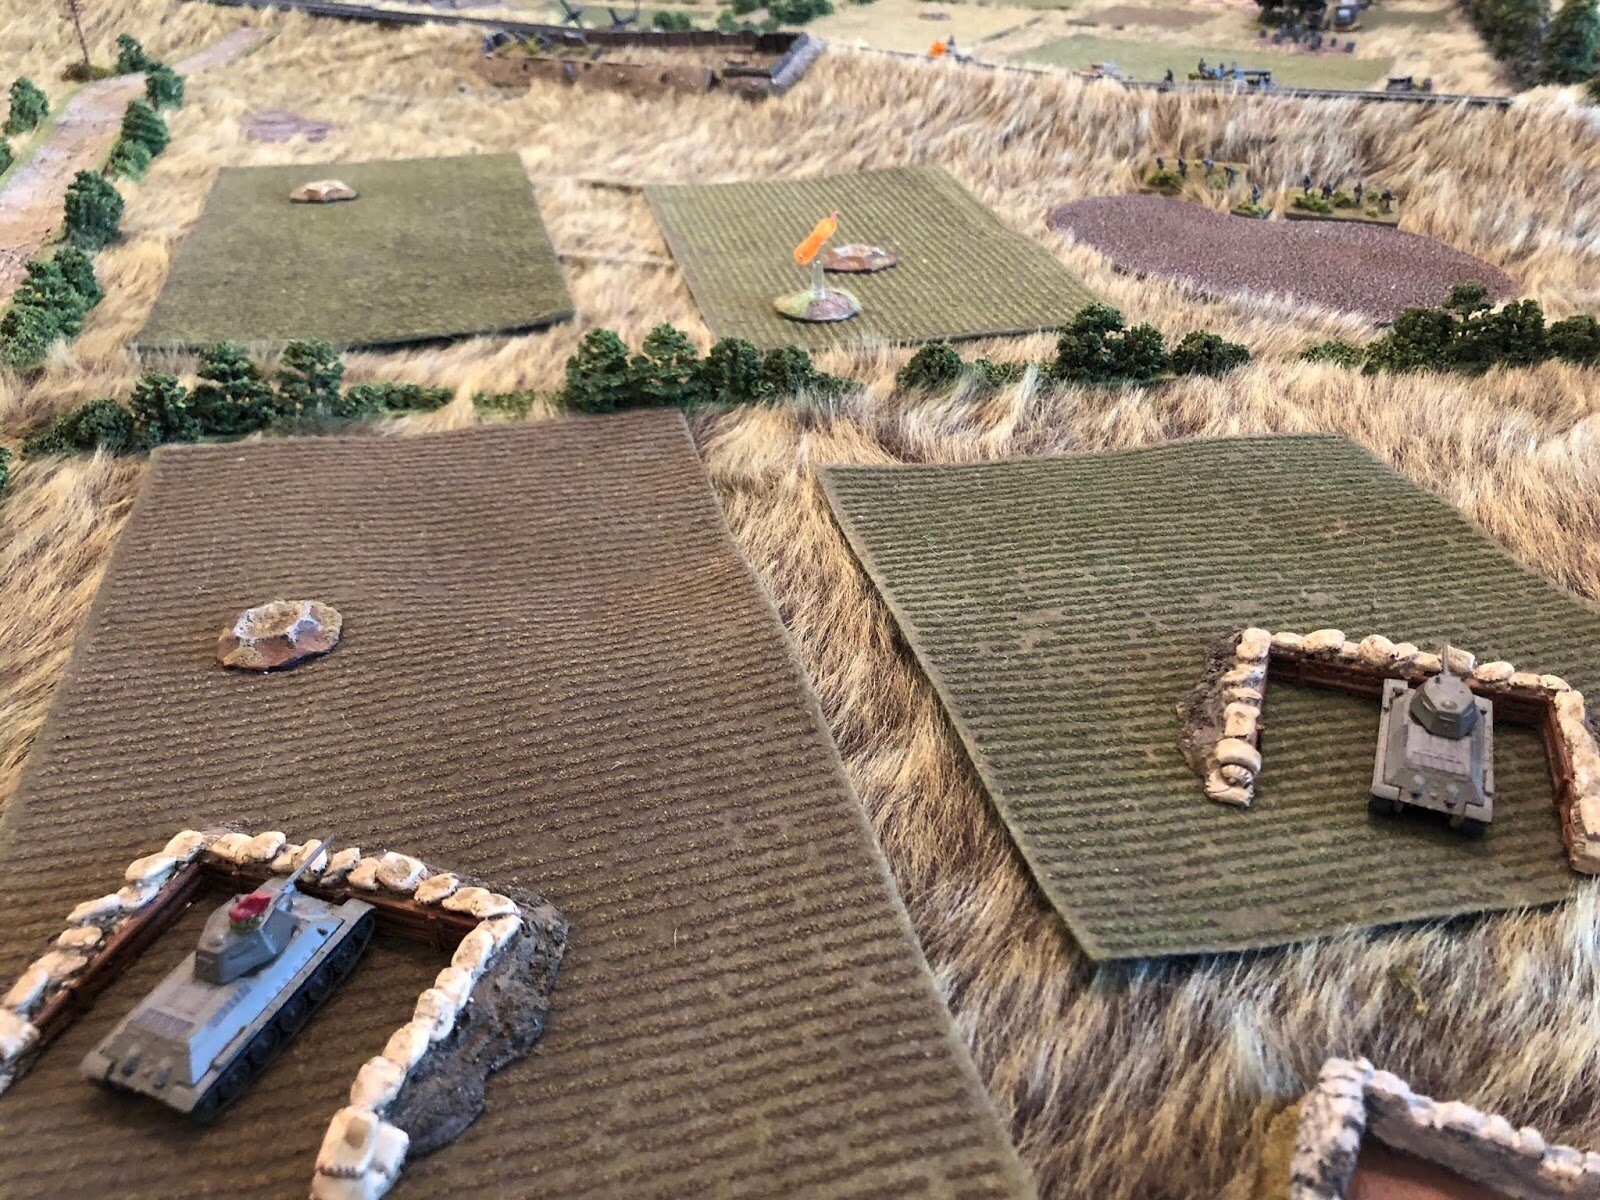  The Soviet tanks continue to engage the hull-down panzers, to no avail.  